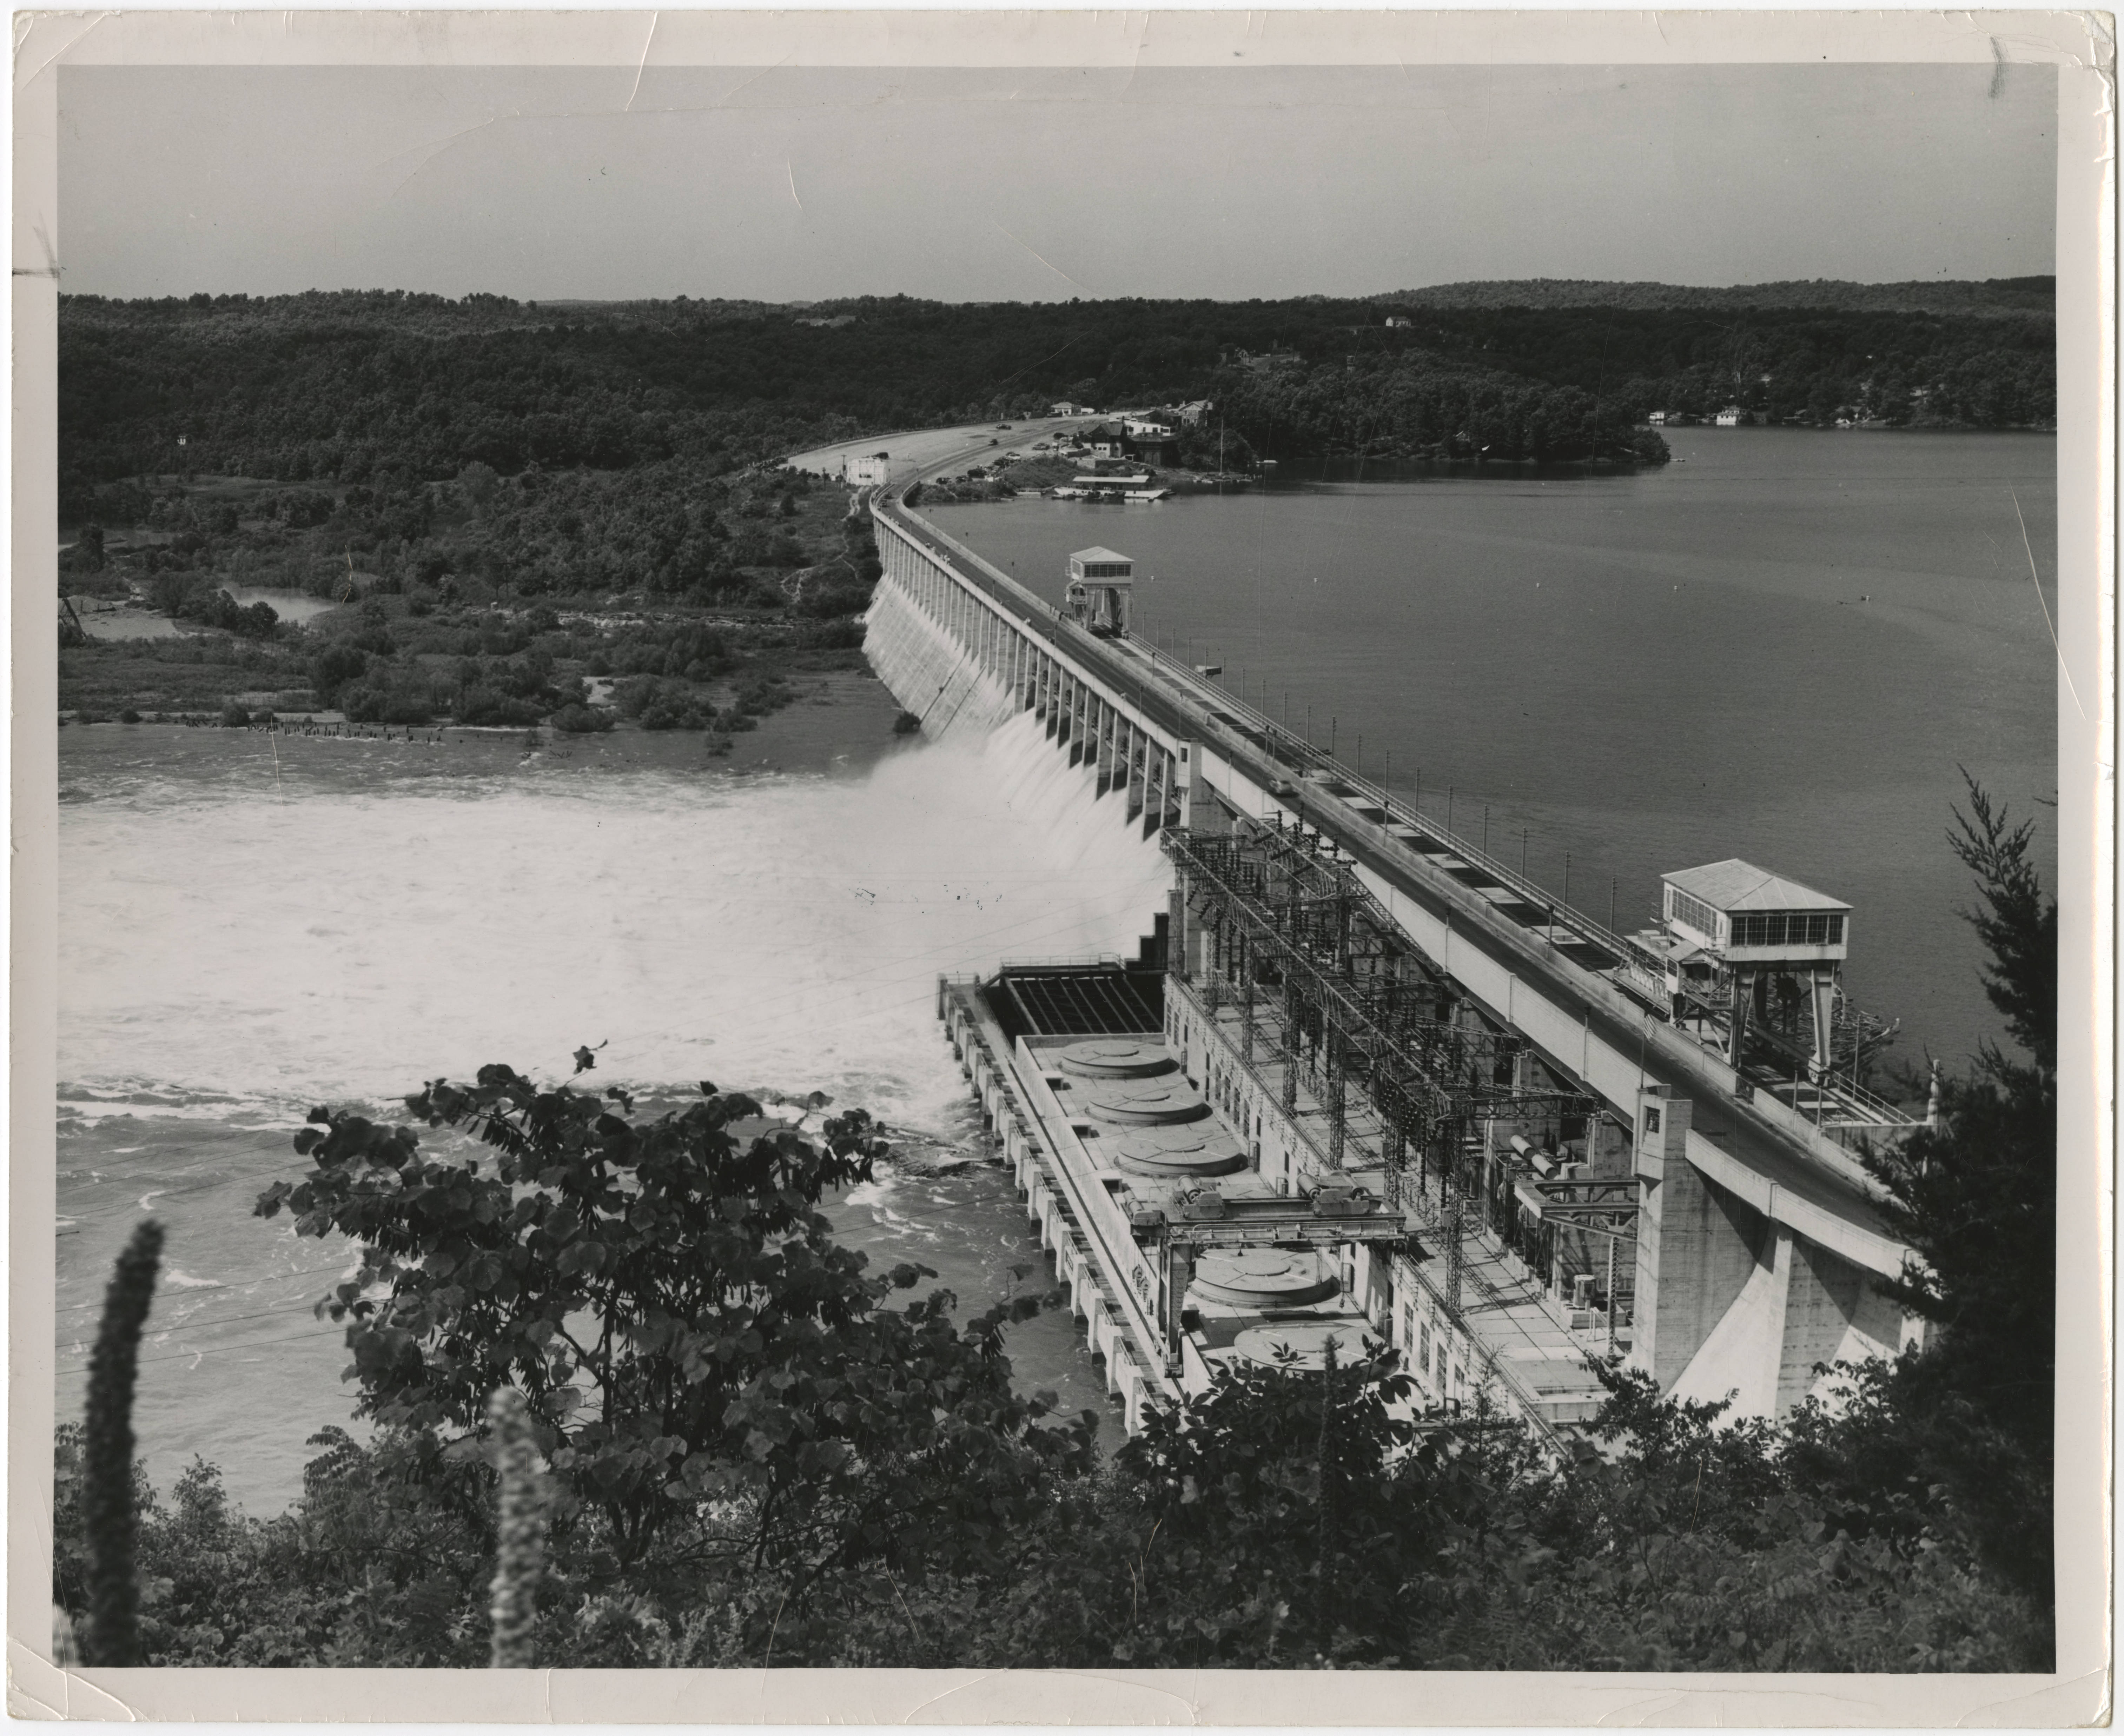 Bagnell Dam impounds the Osage River to create Lake of the Ozarks.